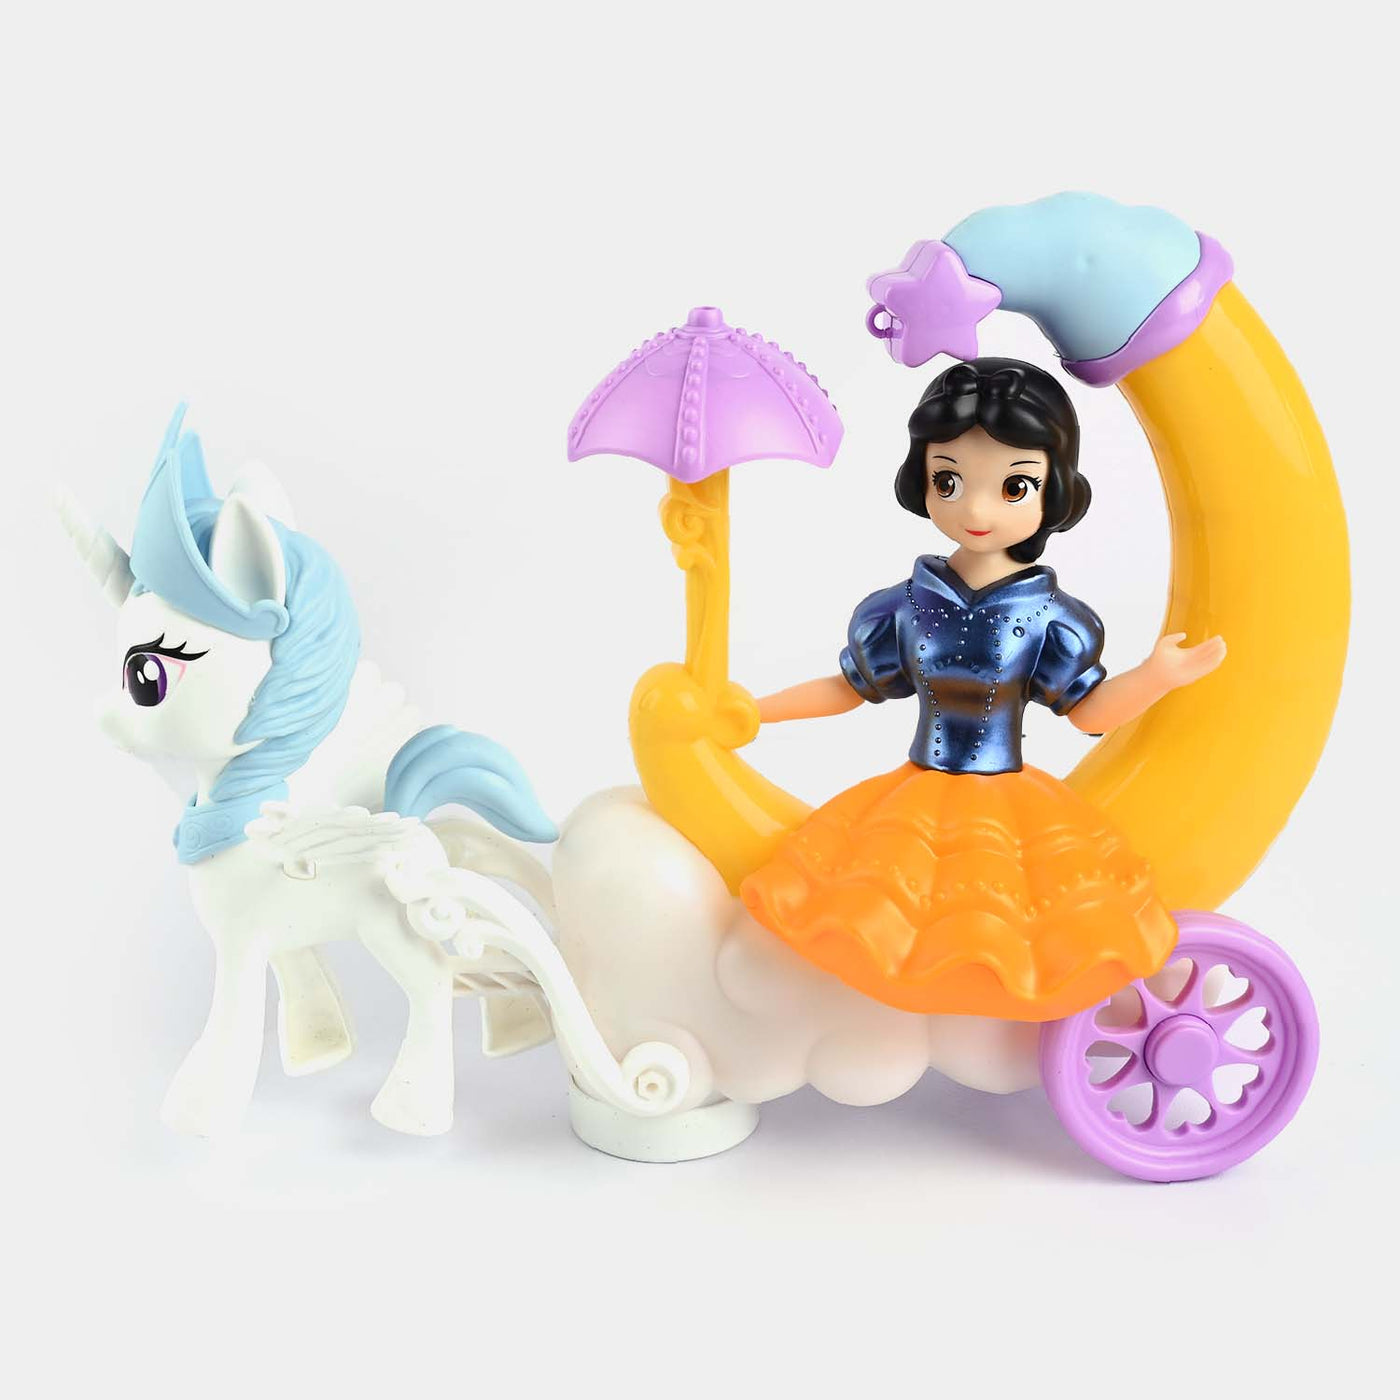 Cute Princess Doll With Carriage